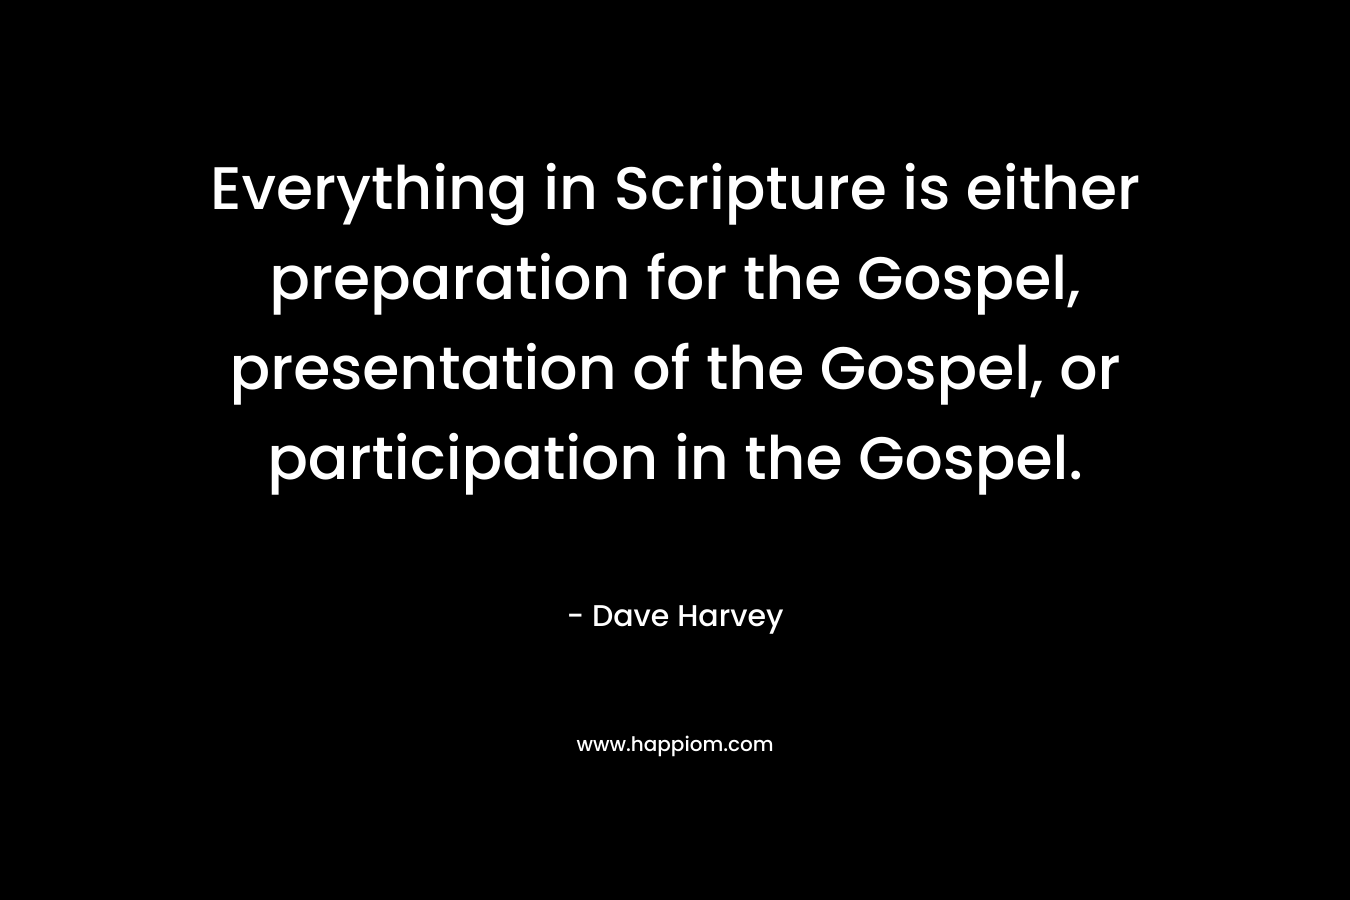 Everything in Scripture is either preparation for the Gospel, presentation of the Gospel, or participation in the Gospel. – Dave Harvey